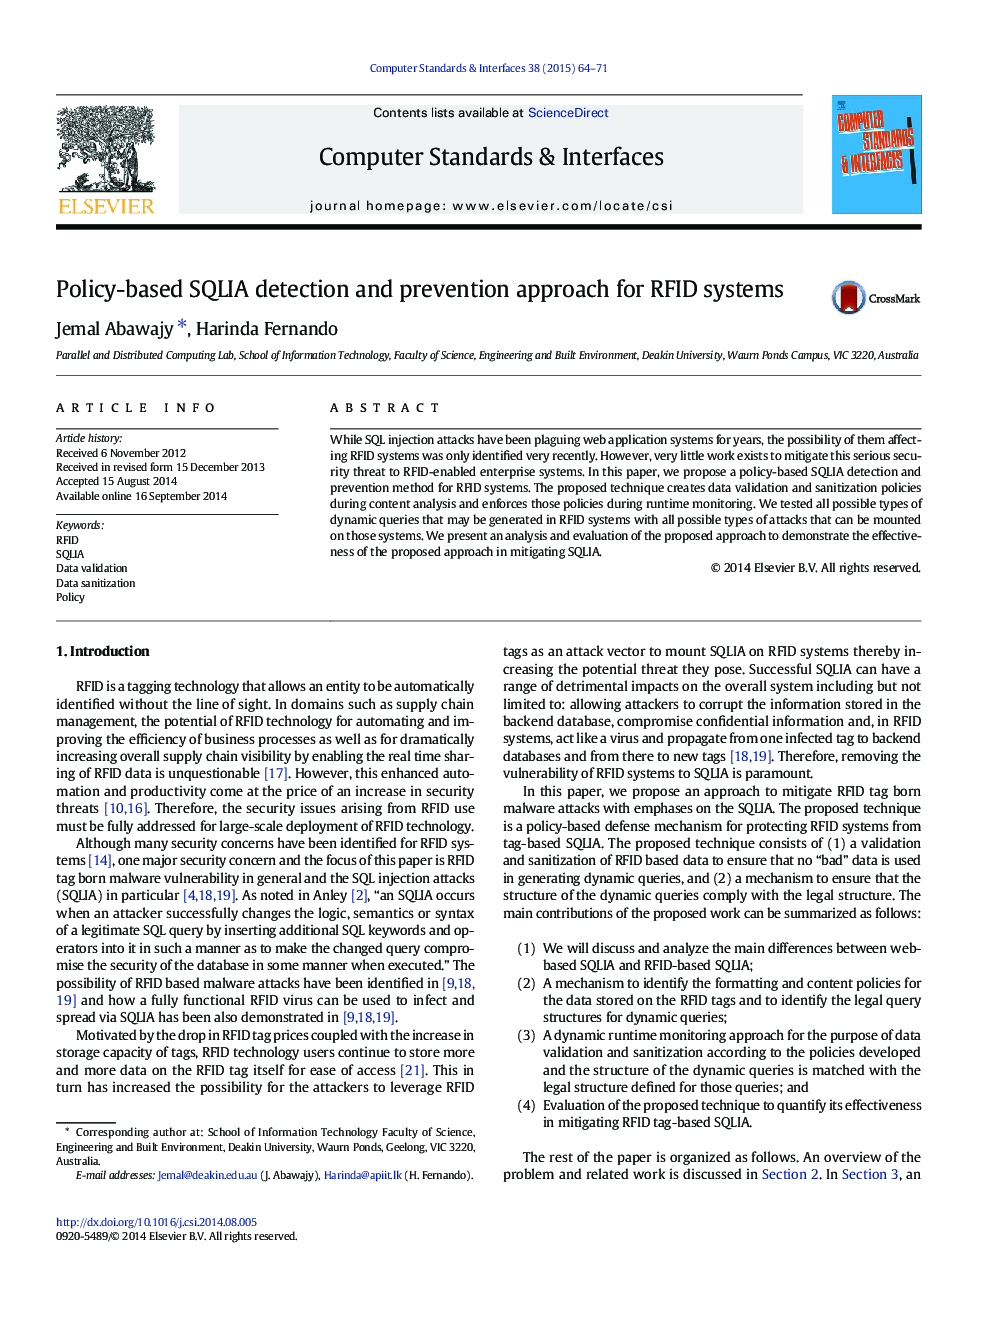 Policy-based SQLIA detection and prevention approach for RFID systems